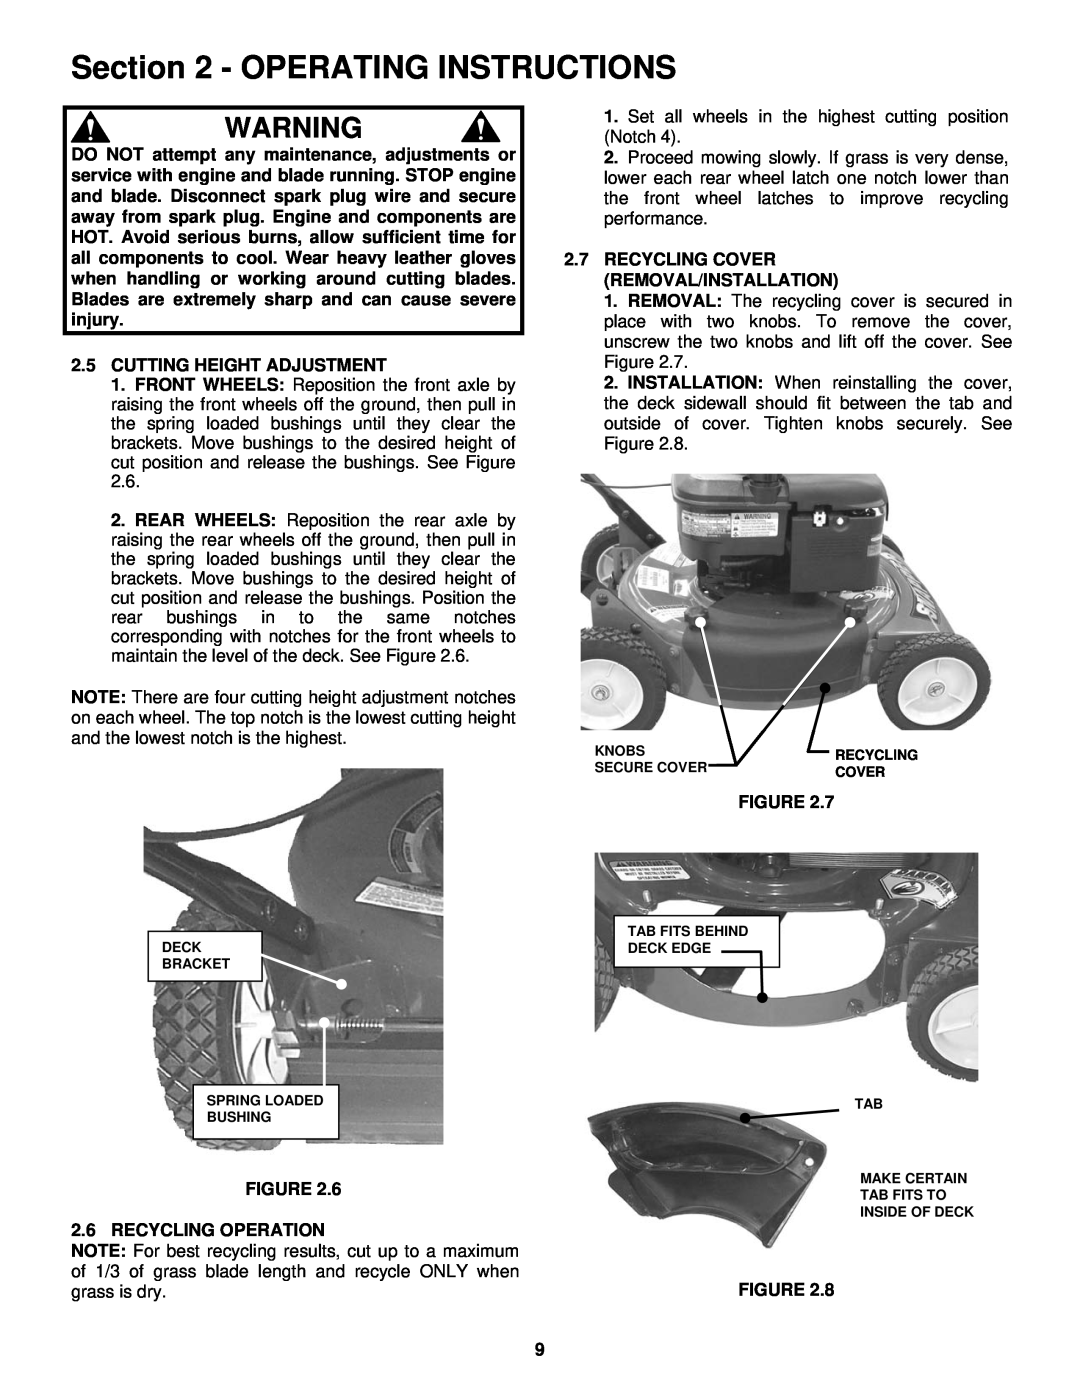 Snapper R1962519B Operating Instructions, Cutting Height Adjustment, Recycling Cover Removal/Installation 